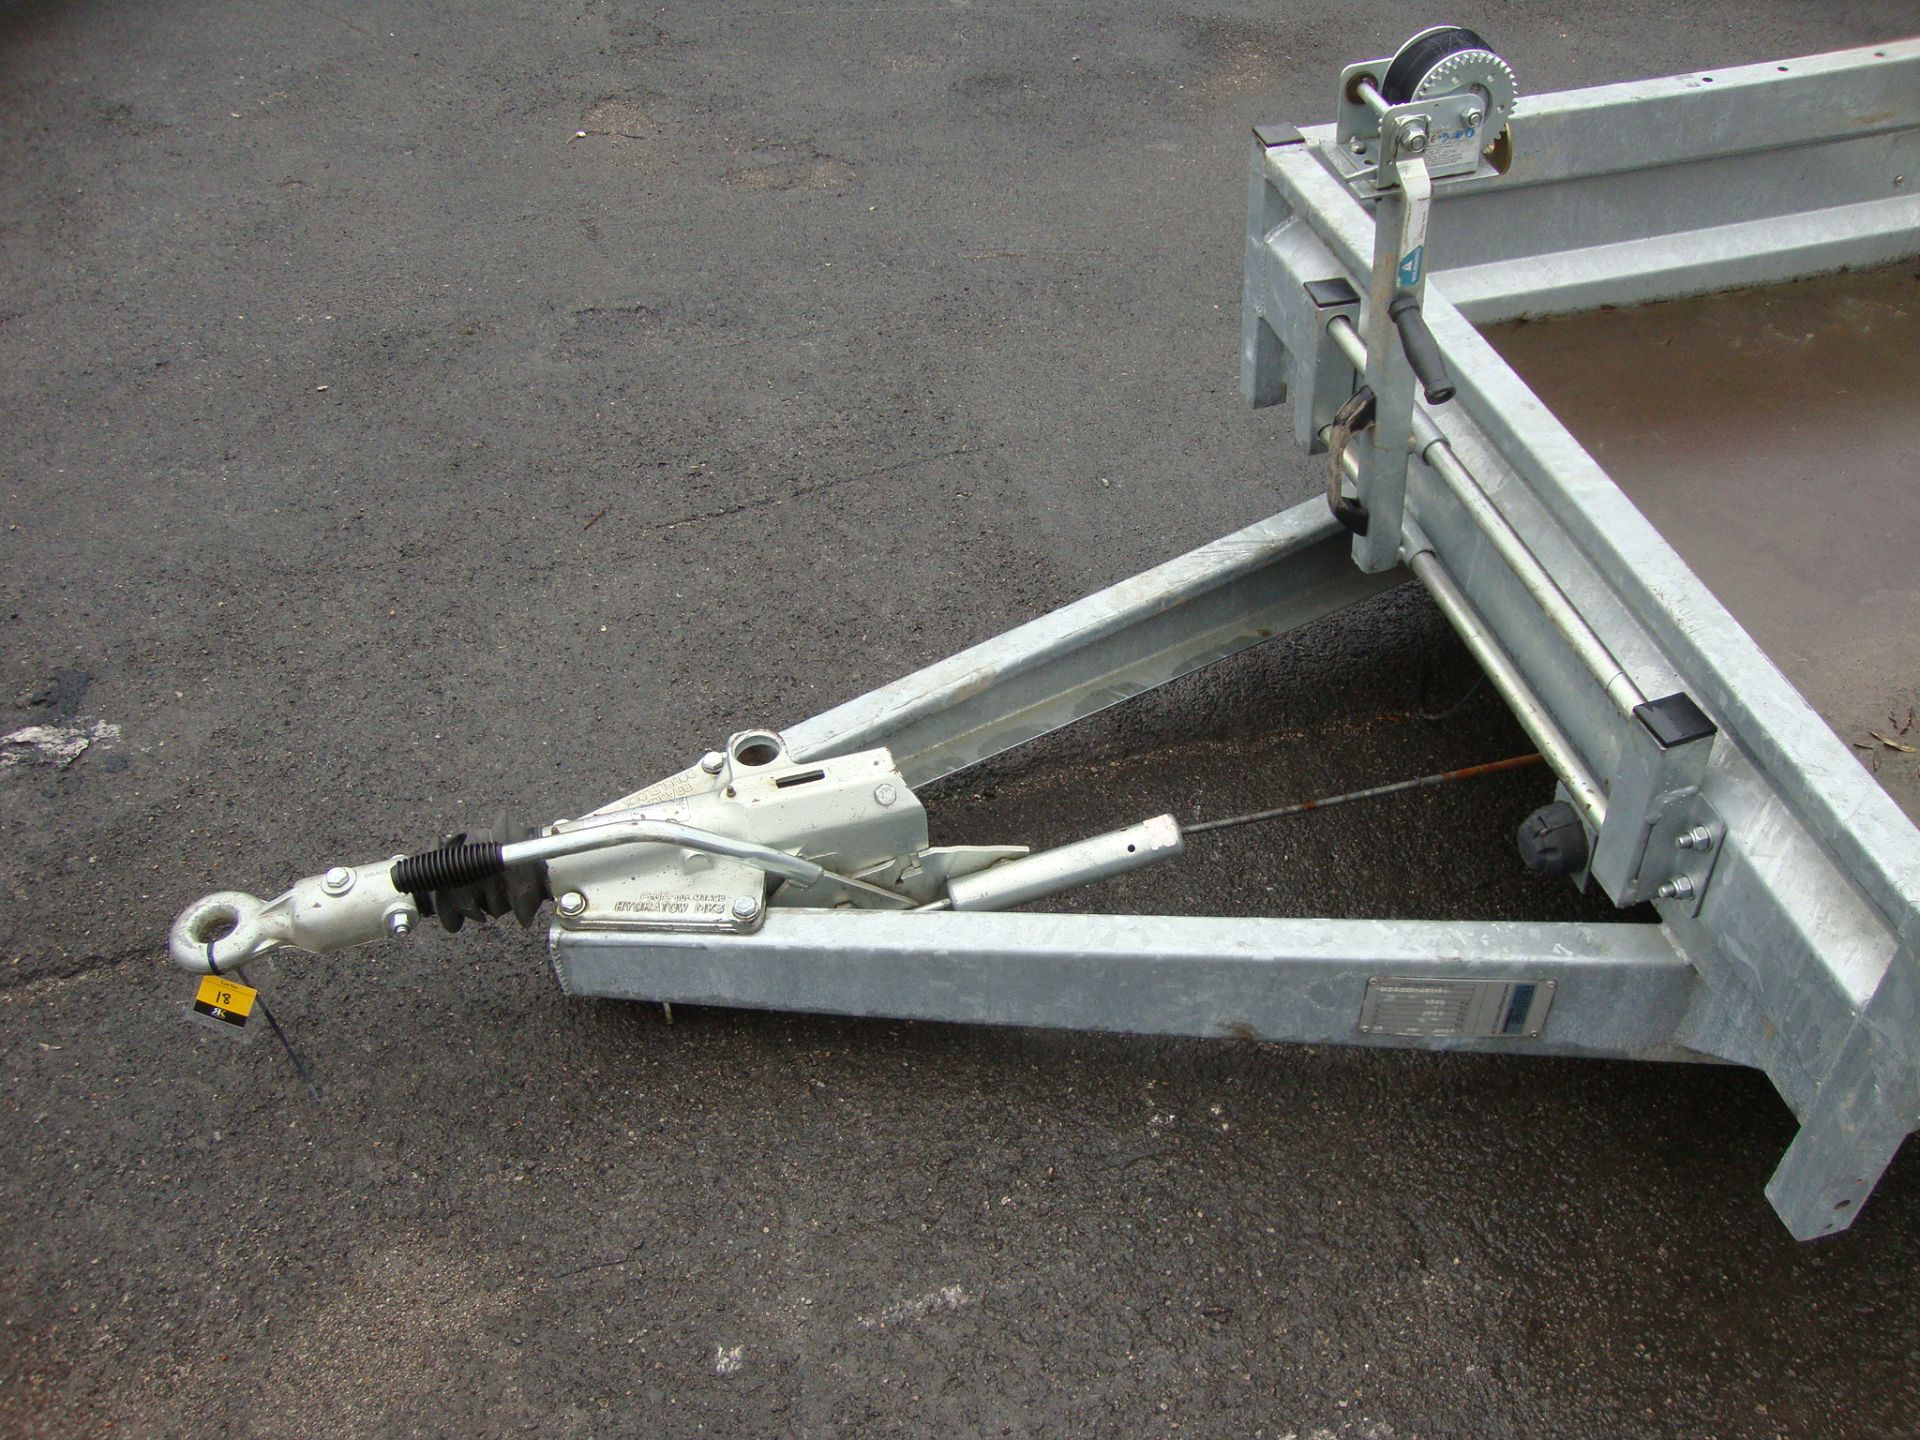 Single axle trailer with open rear (suitable for attaching a small drop down panel or a large ramp), - Image 6 of 7